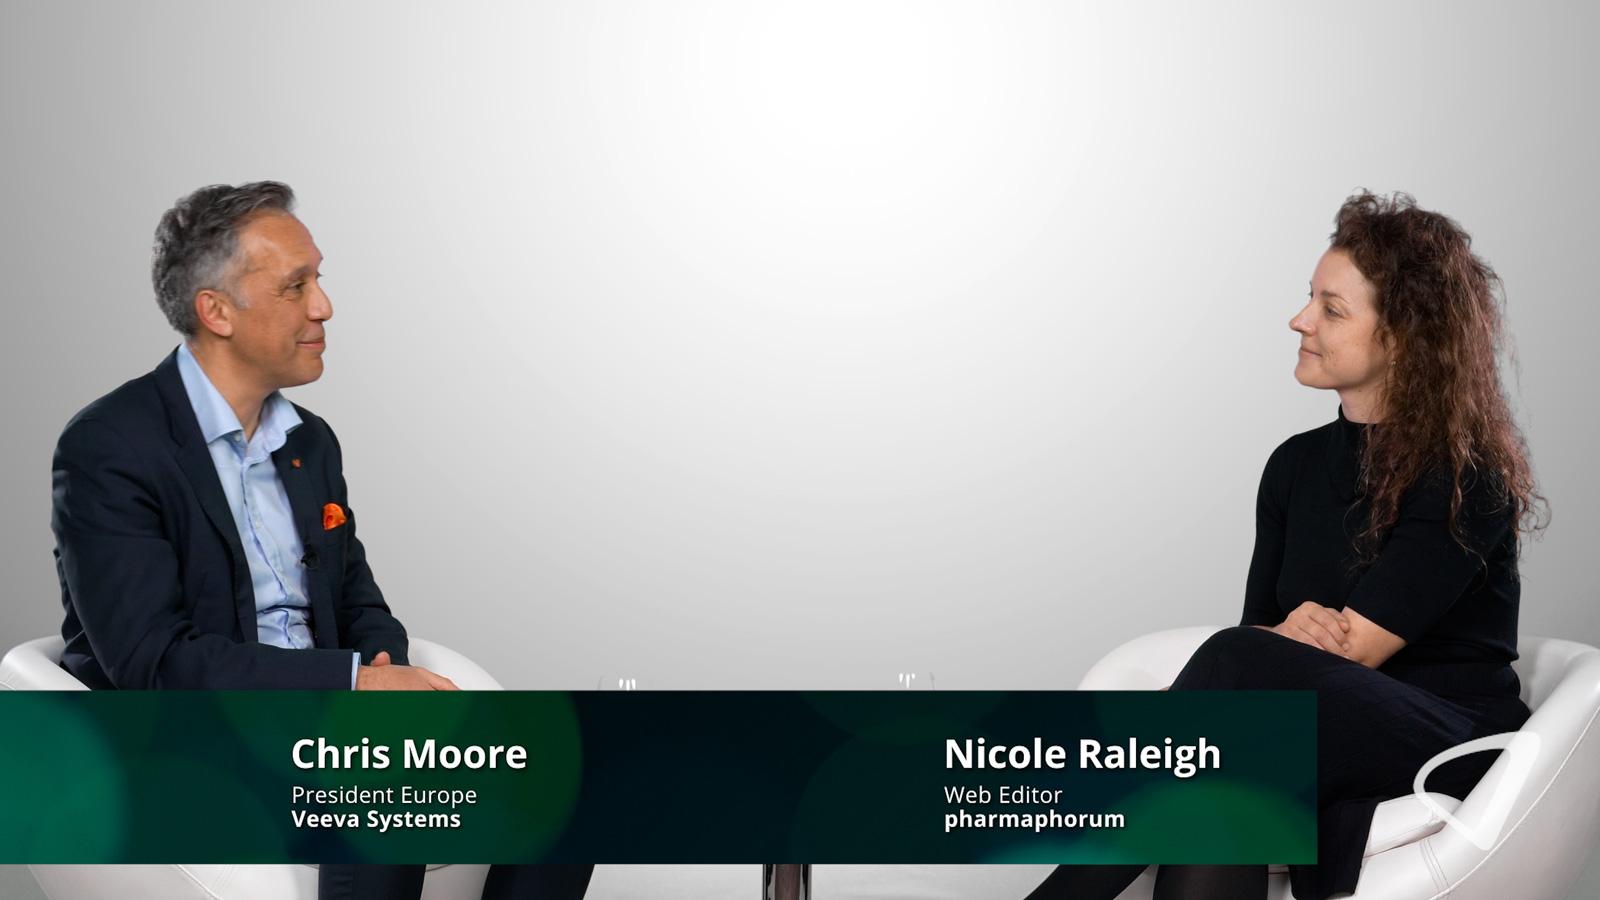 Veeva Systems' Chris Moore interview with Nicole Raleigh